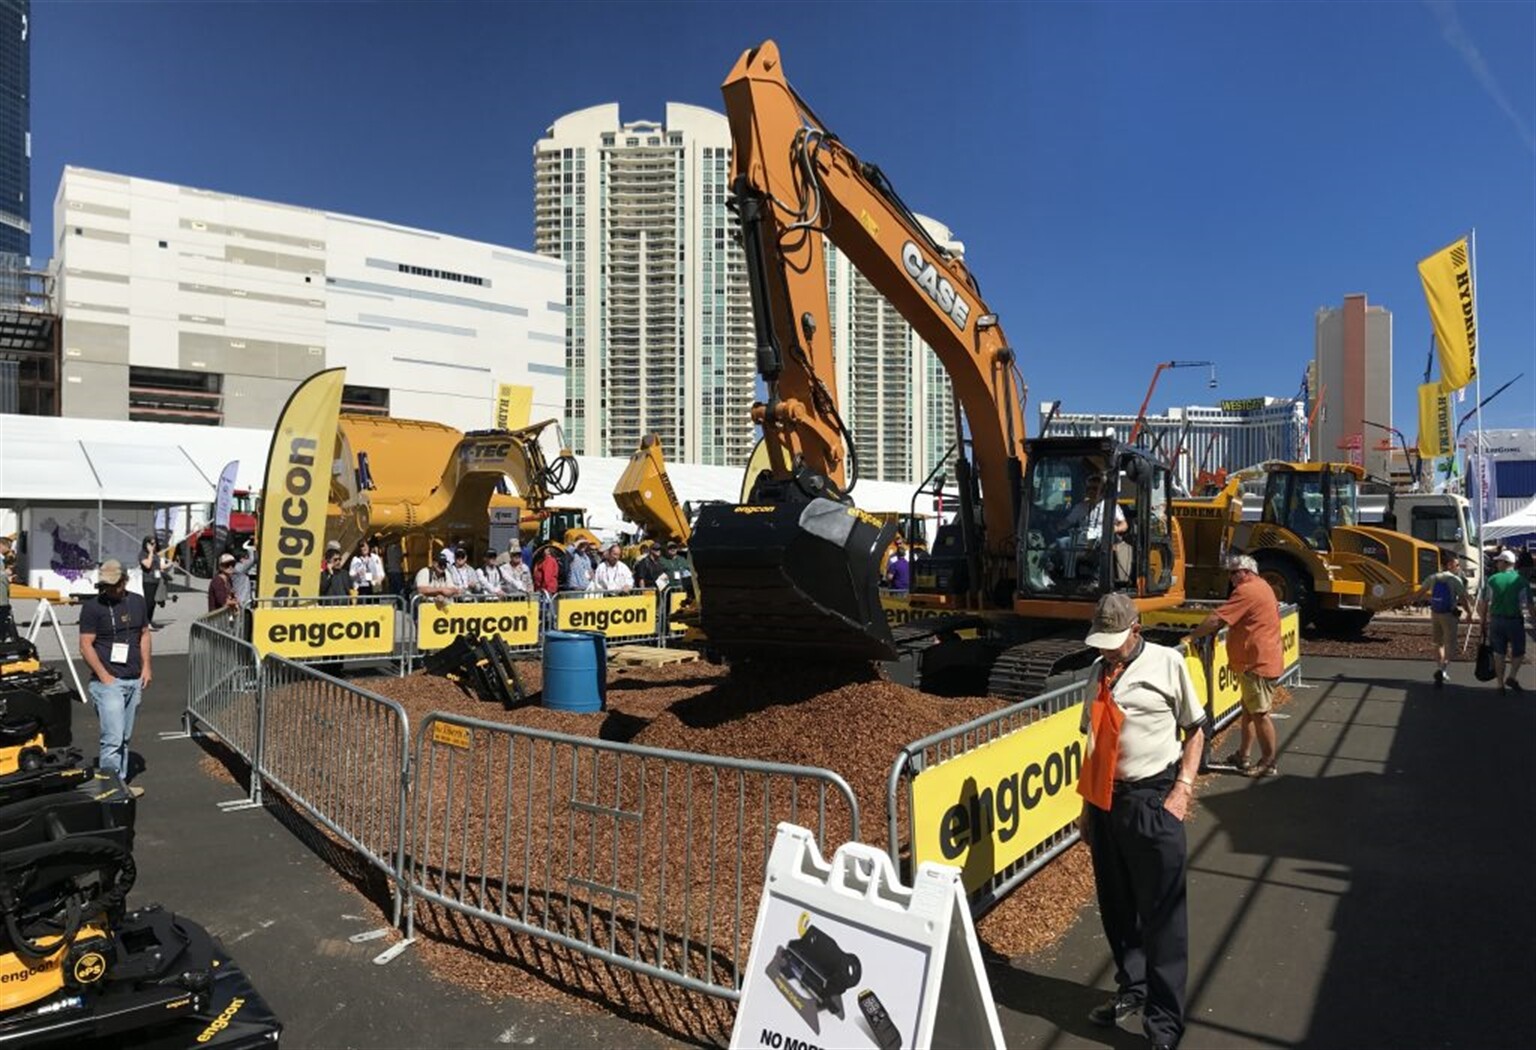 Engcon, born in Sweden, set to be big in America